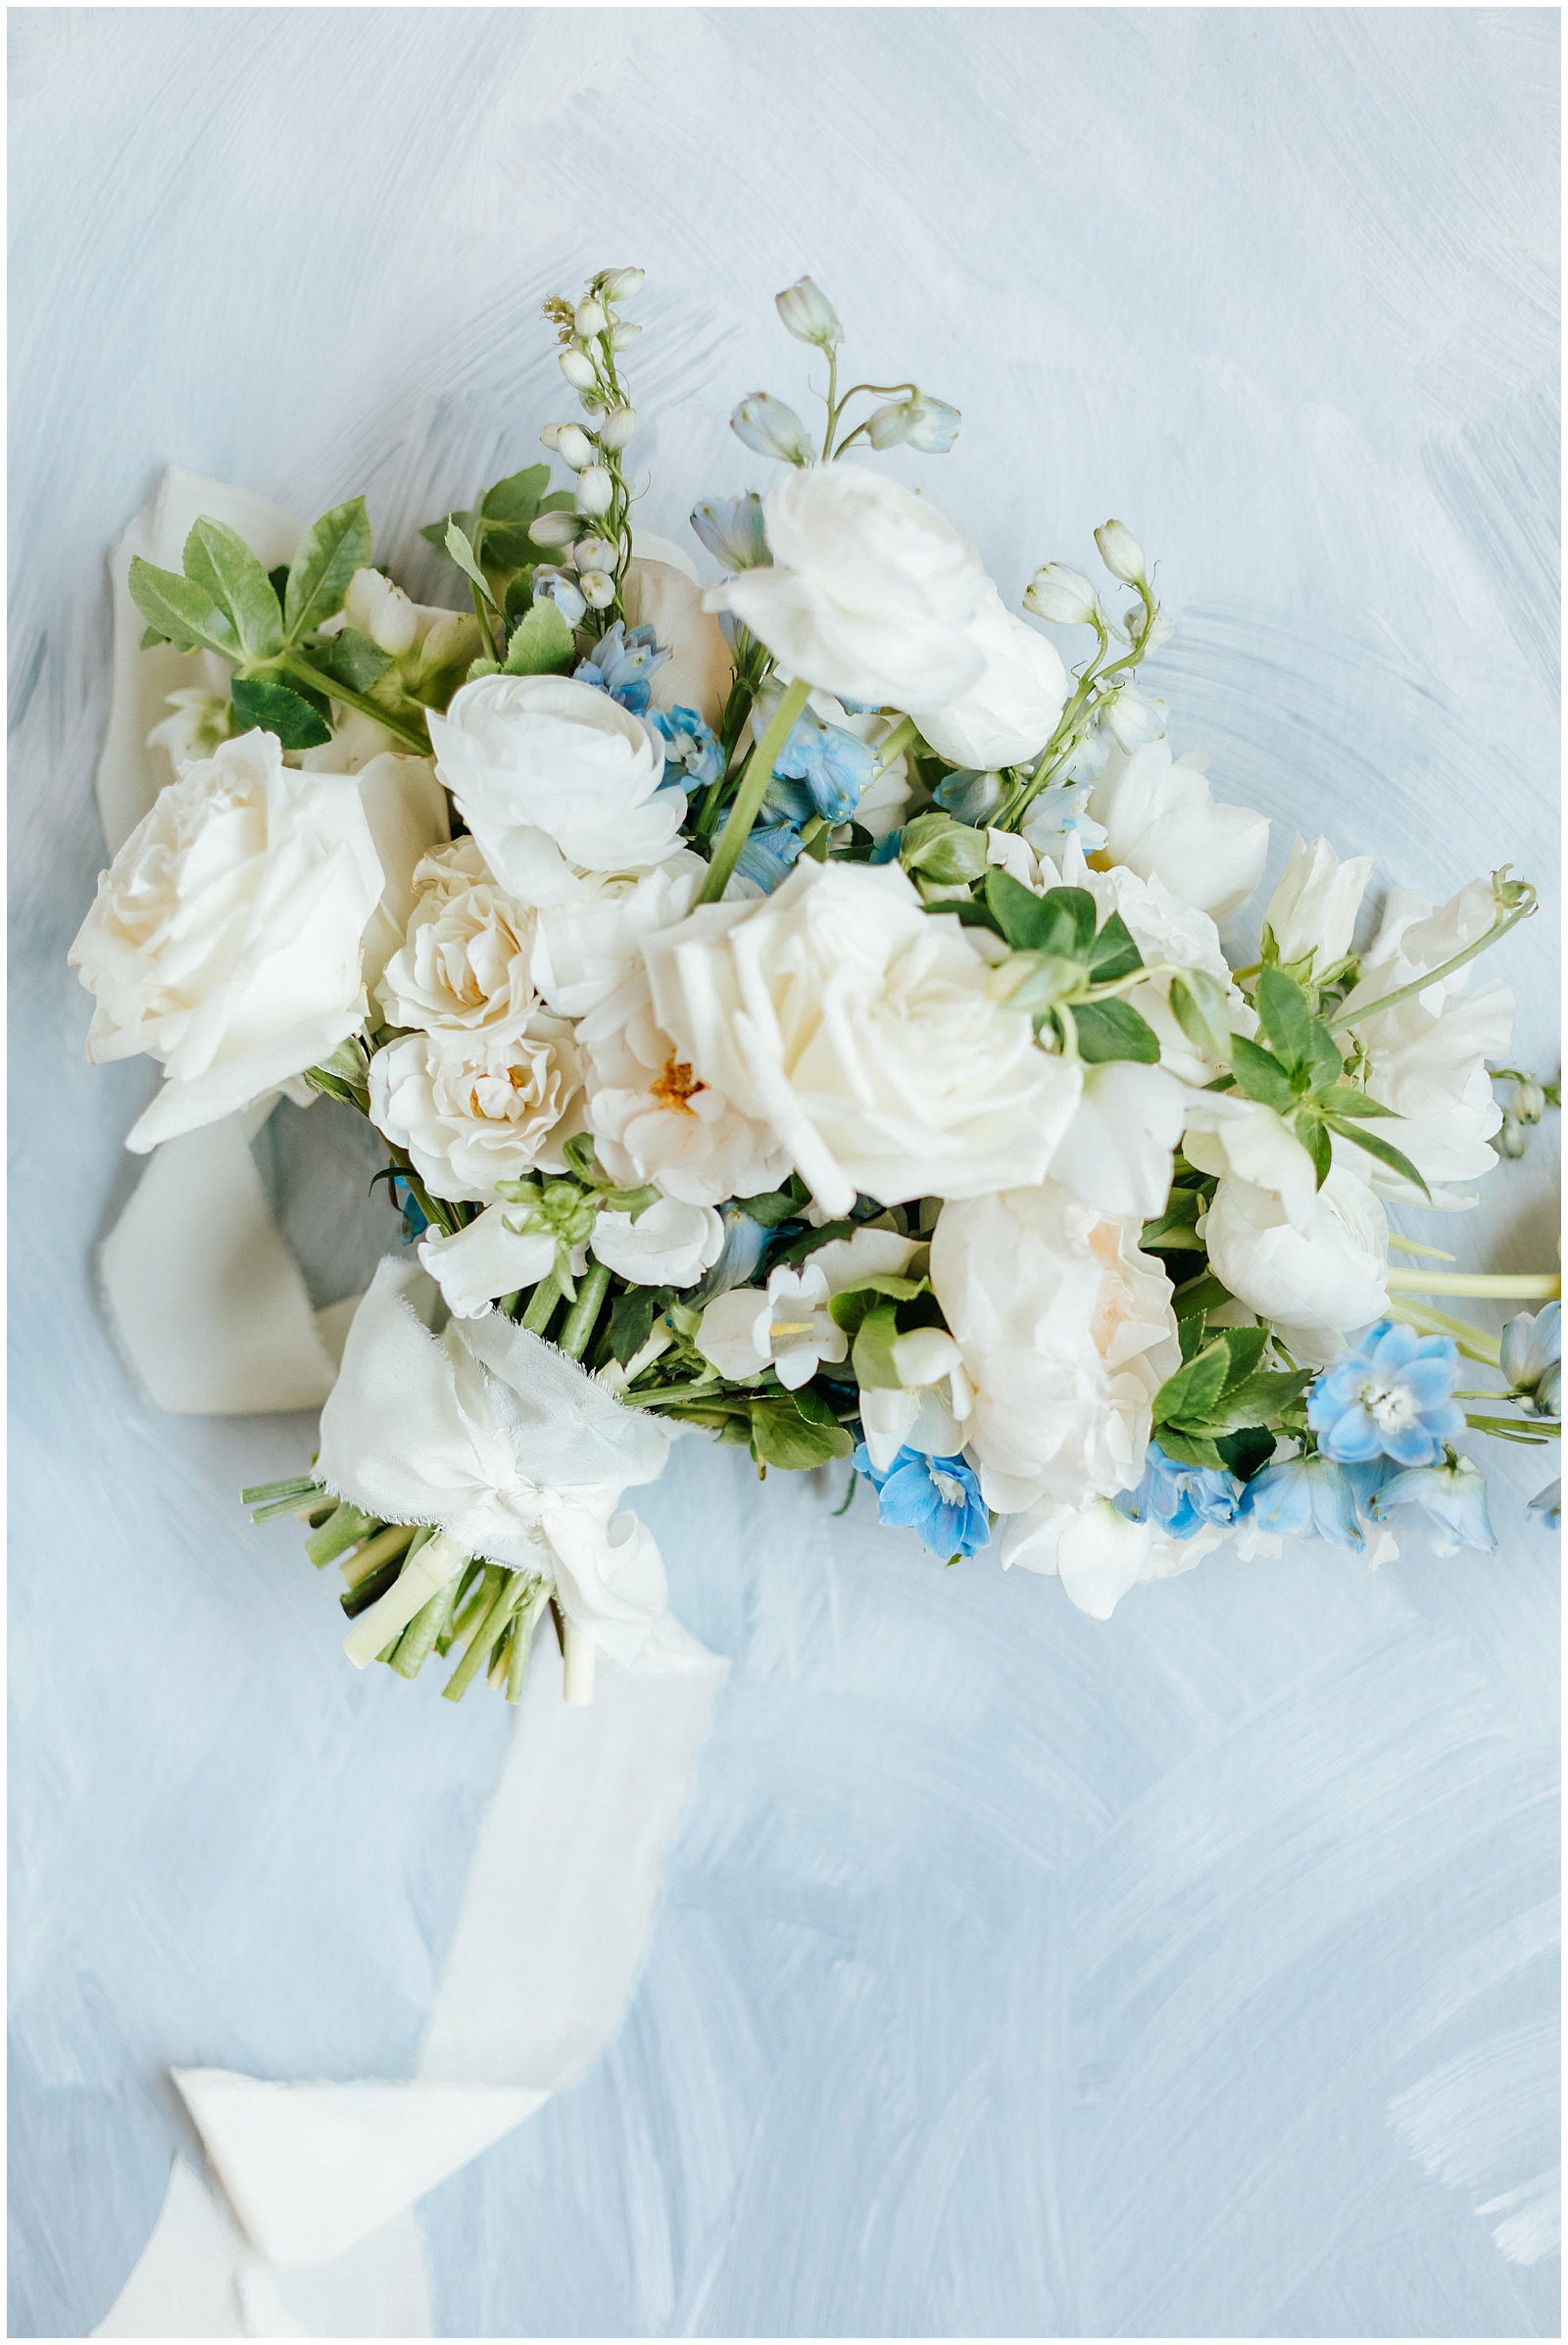 Bridal Bouquet White roses with greenery and blue accents at Classic Elegant Florida Wedding